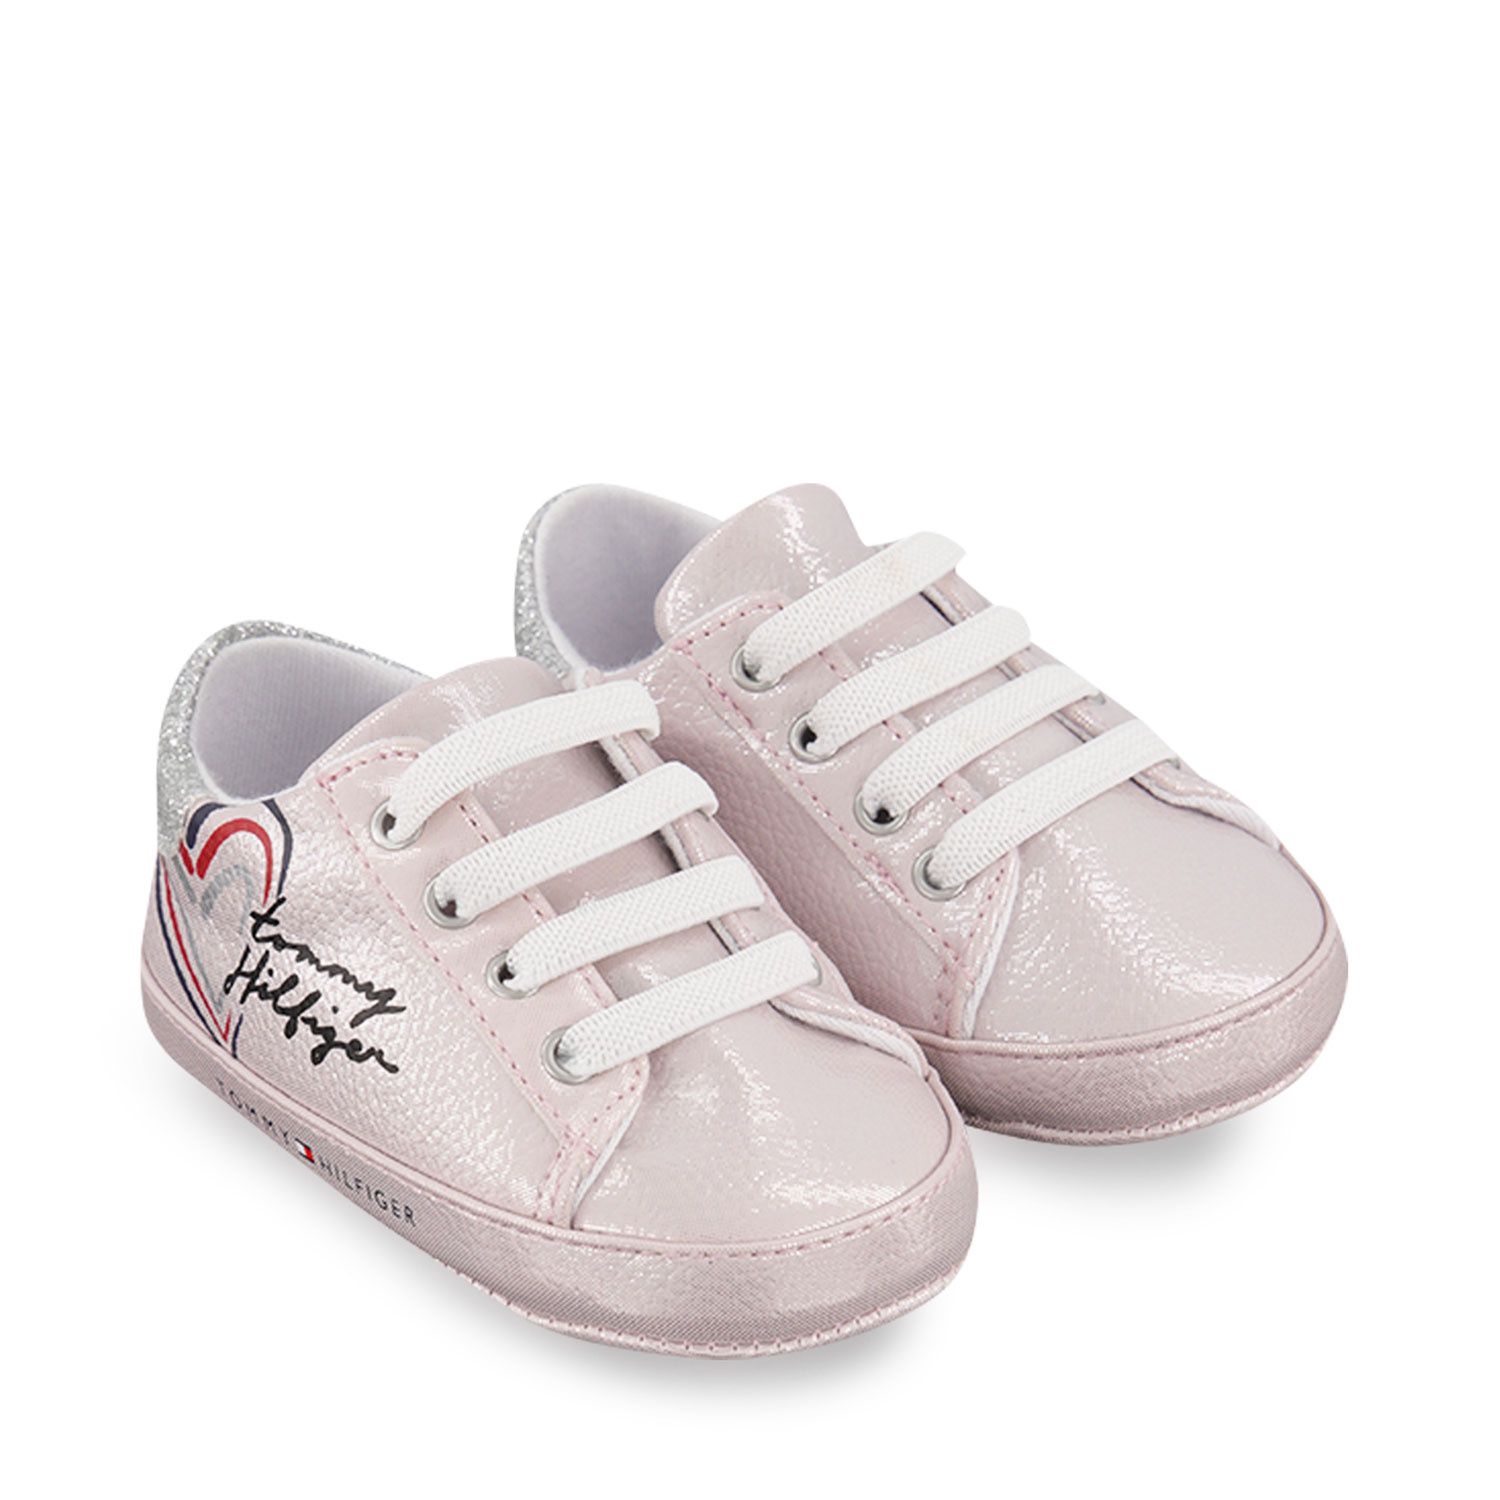 tommy hilfiger baby sneakers